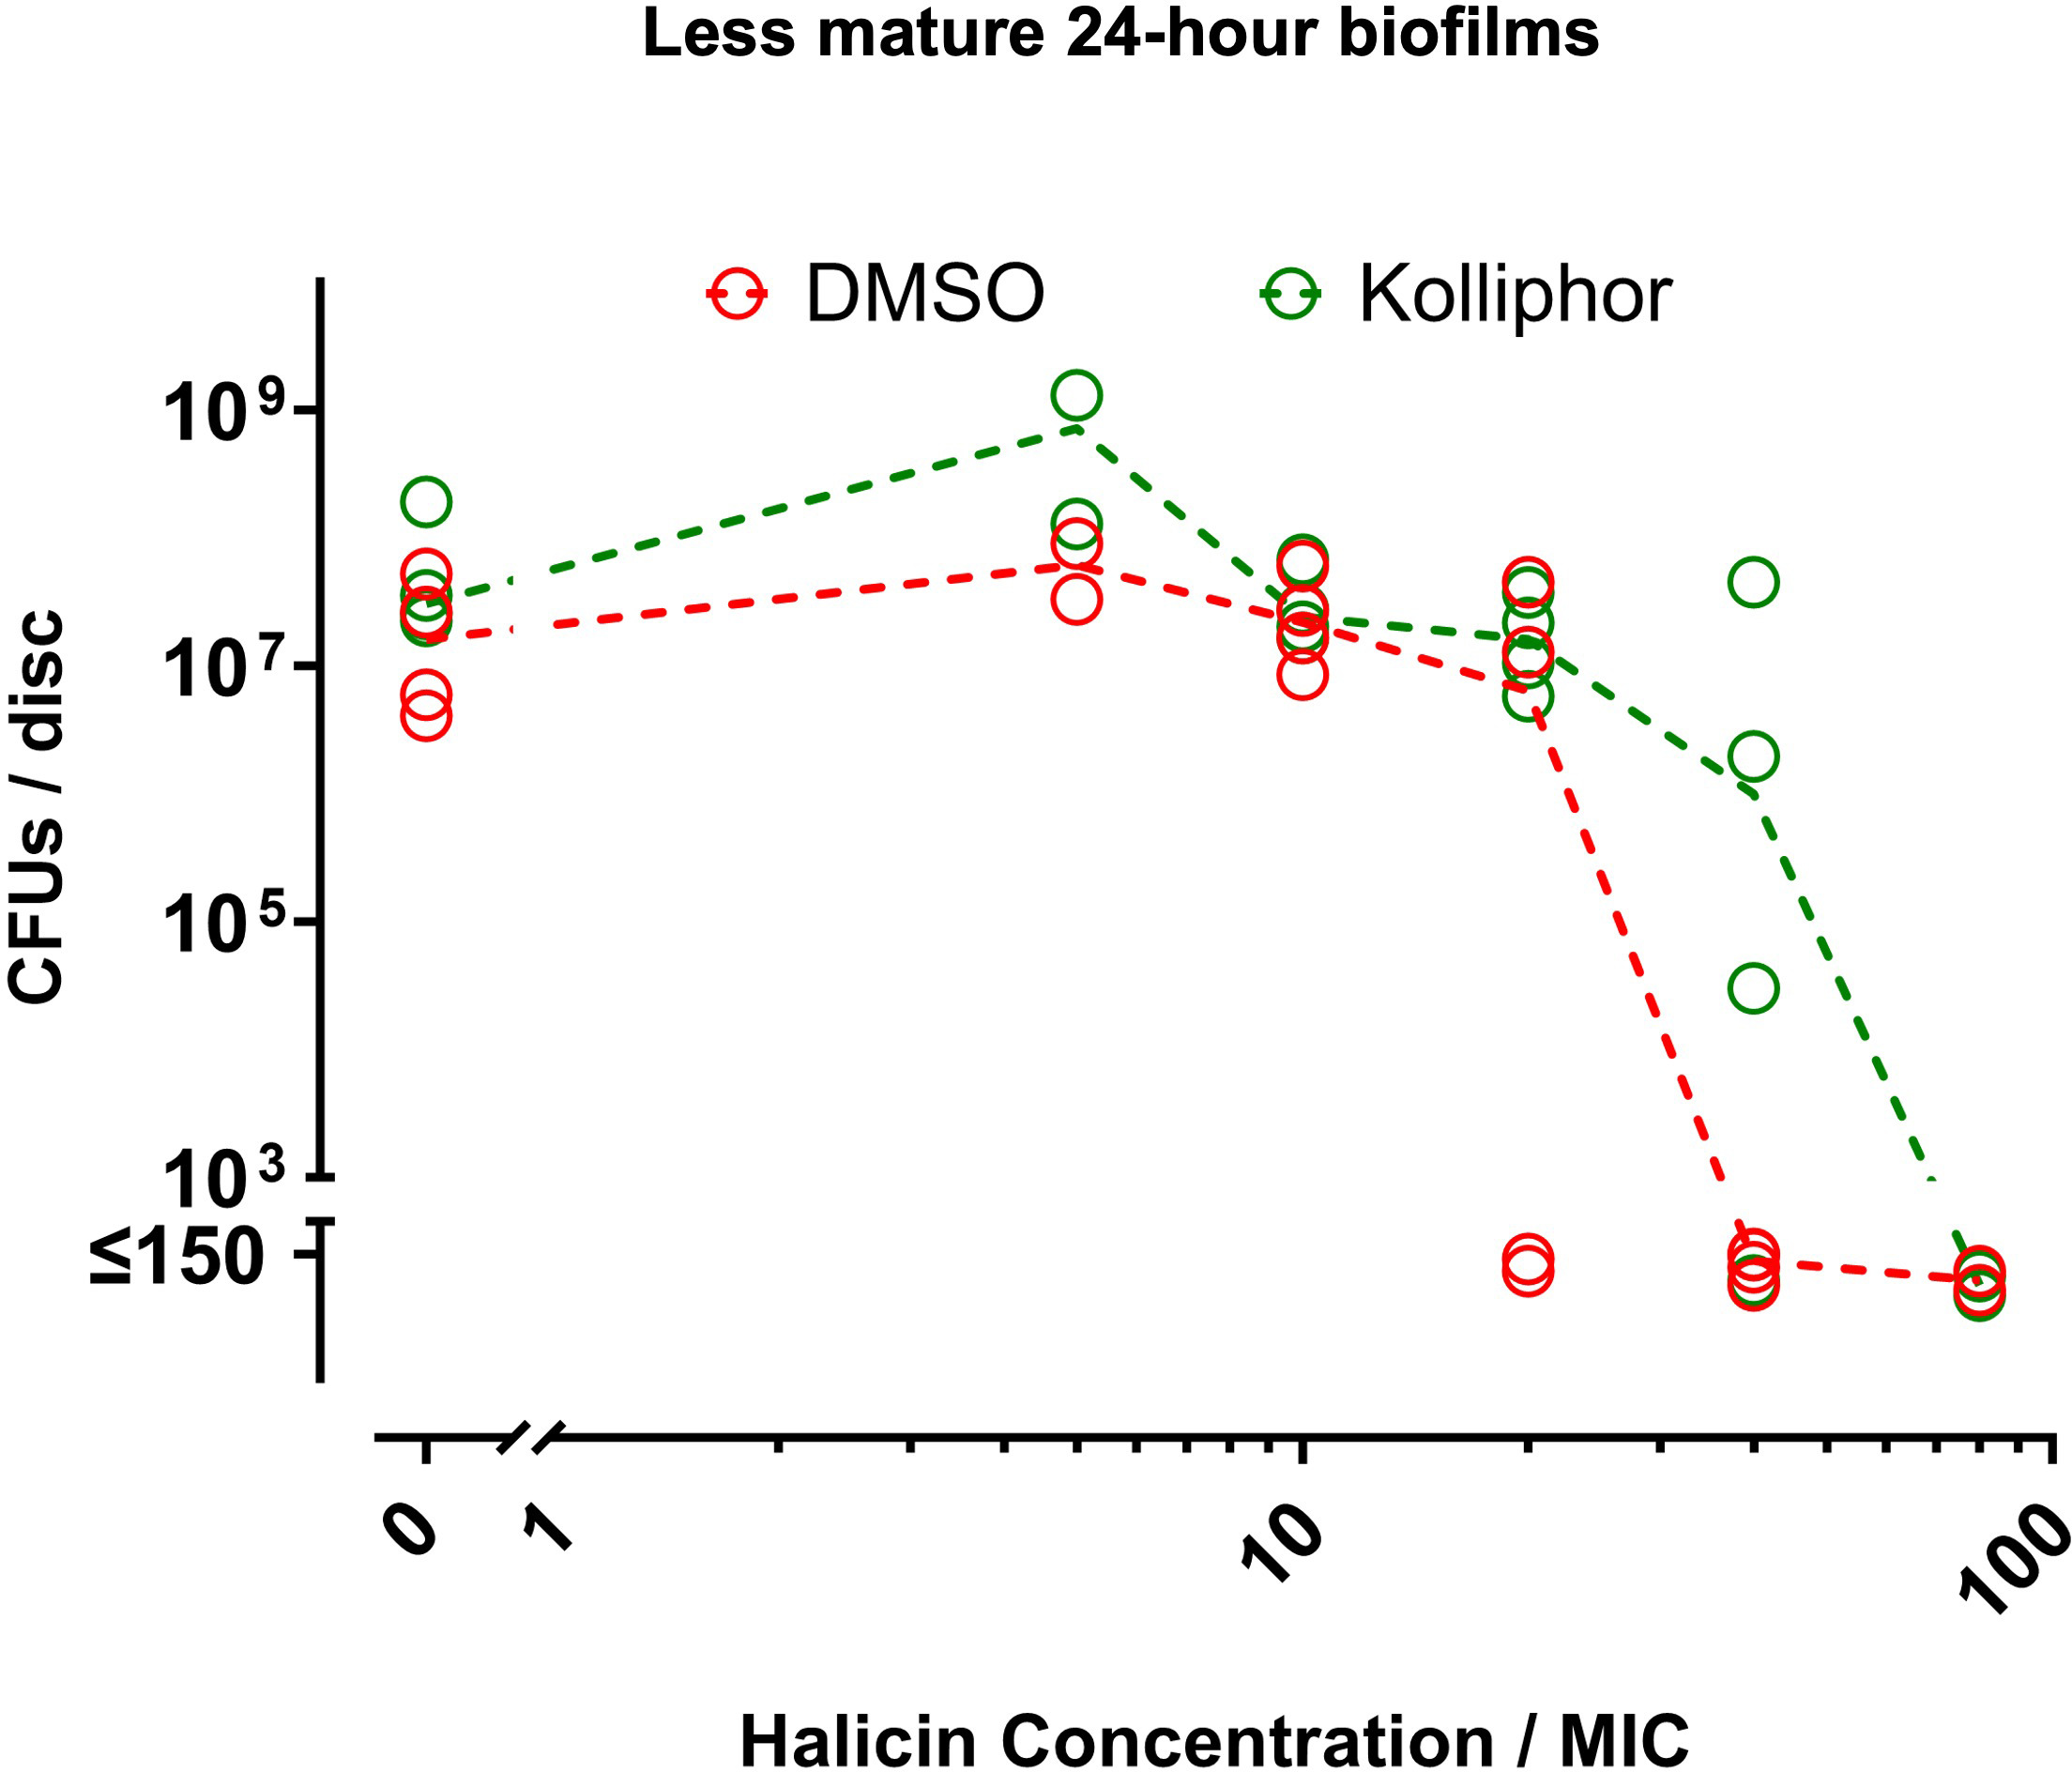 Fig. 6 
          Halicin activity against Staphylococcus aureus-Xen 36 biofilms does not depend on DMSO vehicle. Less mature 24-hour biofilms on Ti6Al4V discs were exposed for 20 hours to the indicated concentrations of halicin with either dimethyl sulfoxide (DMSO) (red symbols) or Kolliphor HS 15 (green symbols) as vehicle. Final concentrations of DMSO or Kolliphor HS 15 were 20% in LB broth without kanamycin for groups with halicin at 80 × minimal inhibitory concentration (MIC) and 10% for all other halicin groups. Controls without halicin therefore included groups with 10% or 20% of either DMSO or Kolliphor HS 15 as vehicle. The concentrations of either vehicle did not affect biofilm viability (Supplementary Figure aa). Effects on biofilm viability were determined by colony-forming unit (CFU) assays. Dashed lines connect medians of four independent experiments for each group. Each symbol denotes the median for each group from an independent experiment, with four Ti6Al4V discs per symbol.
        